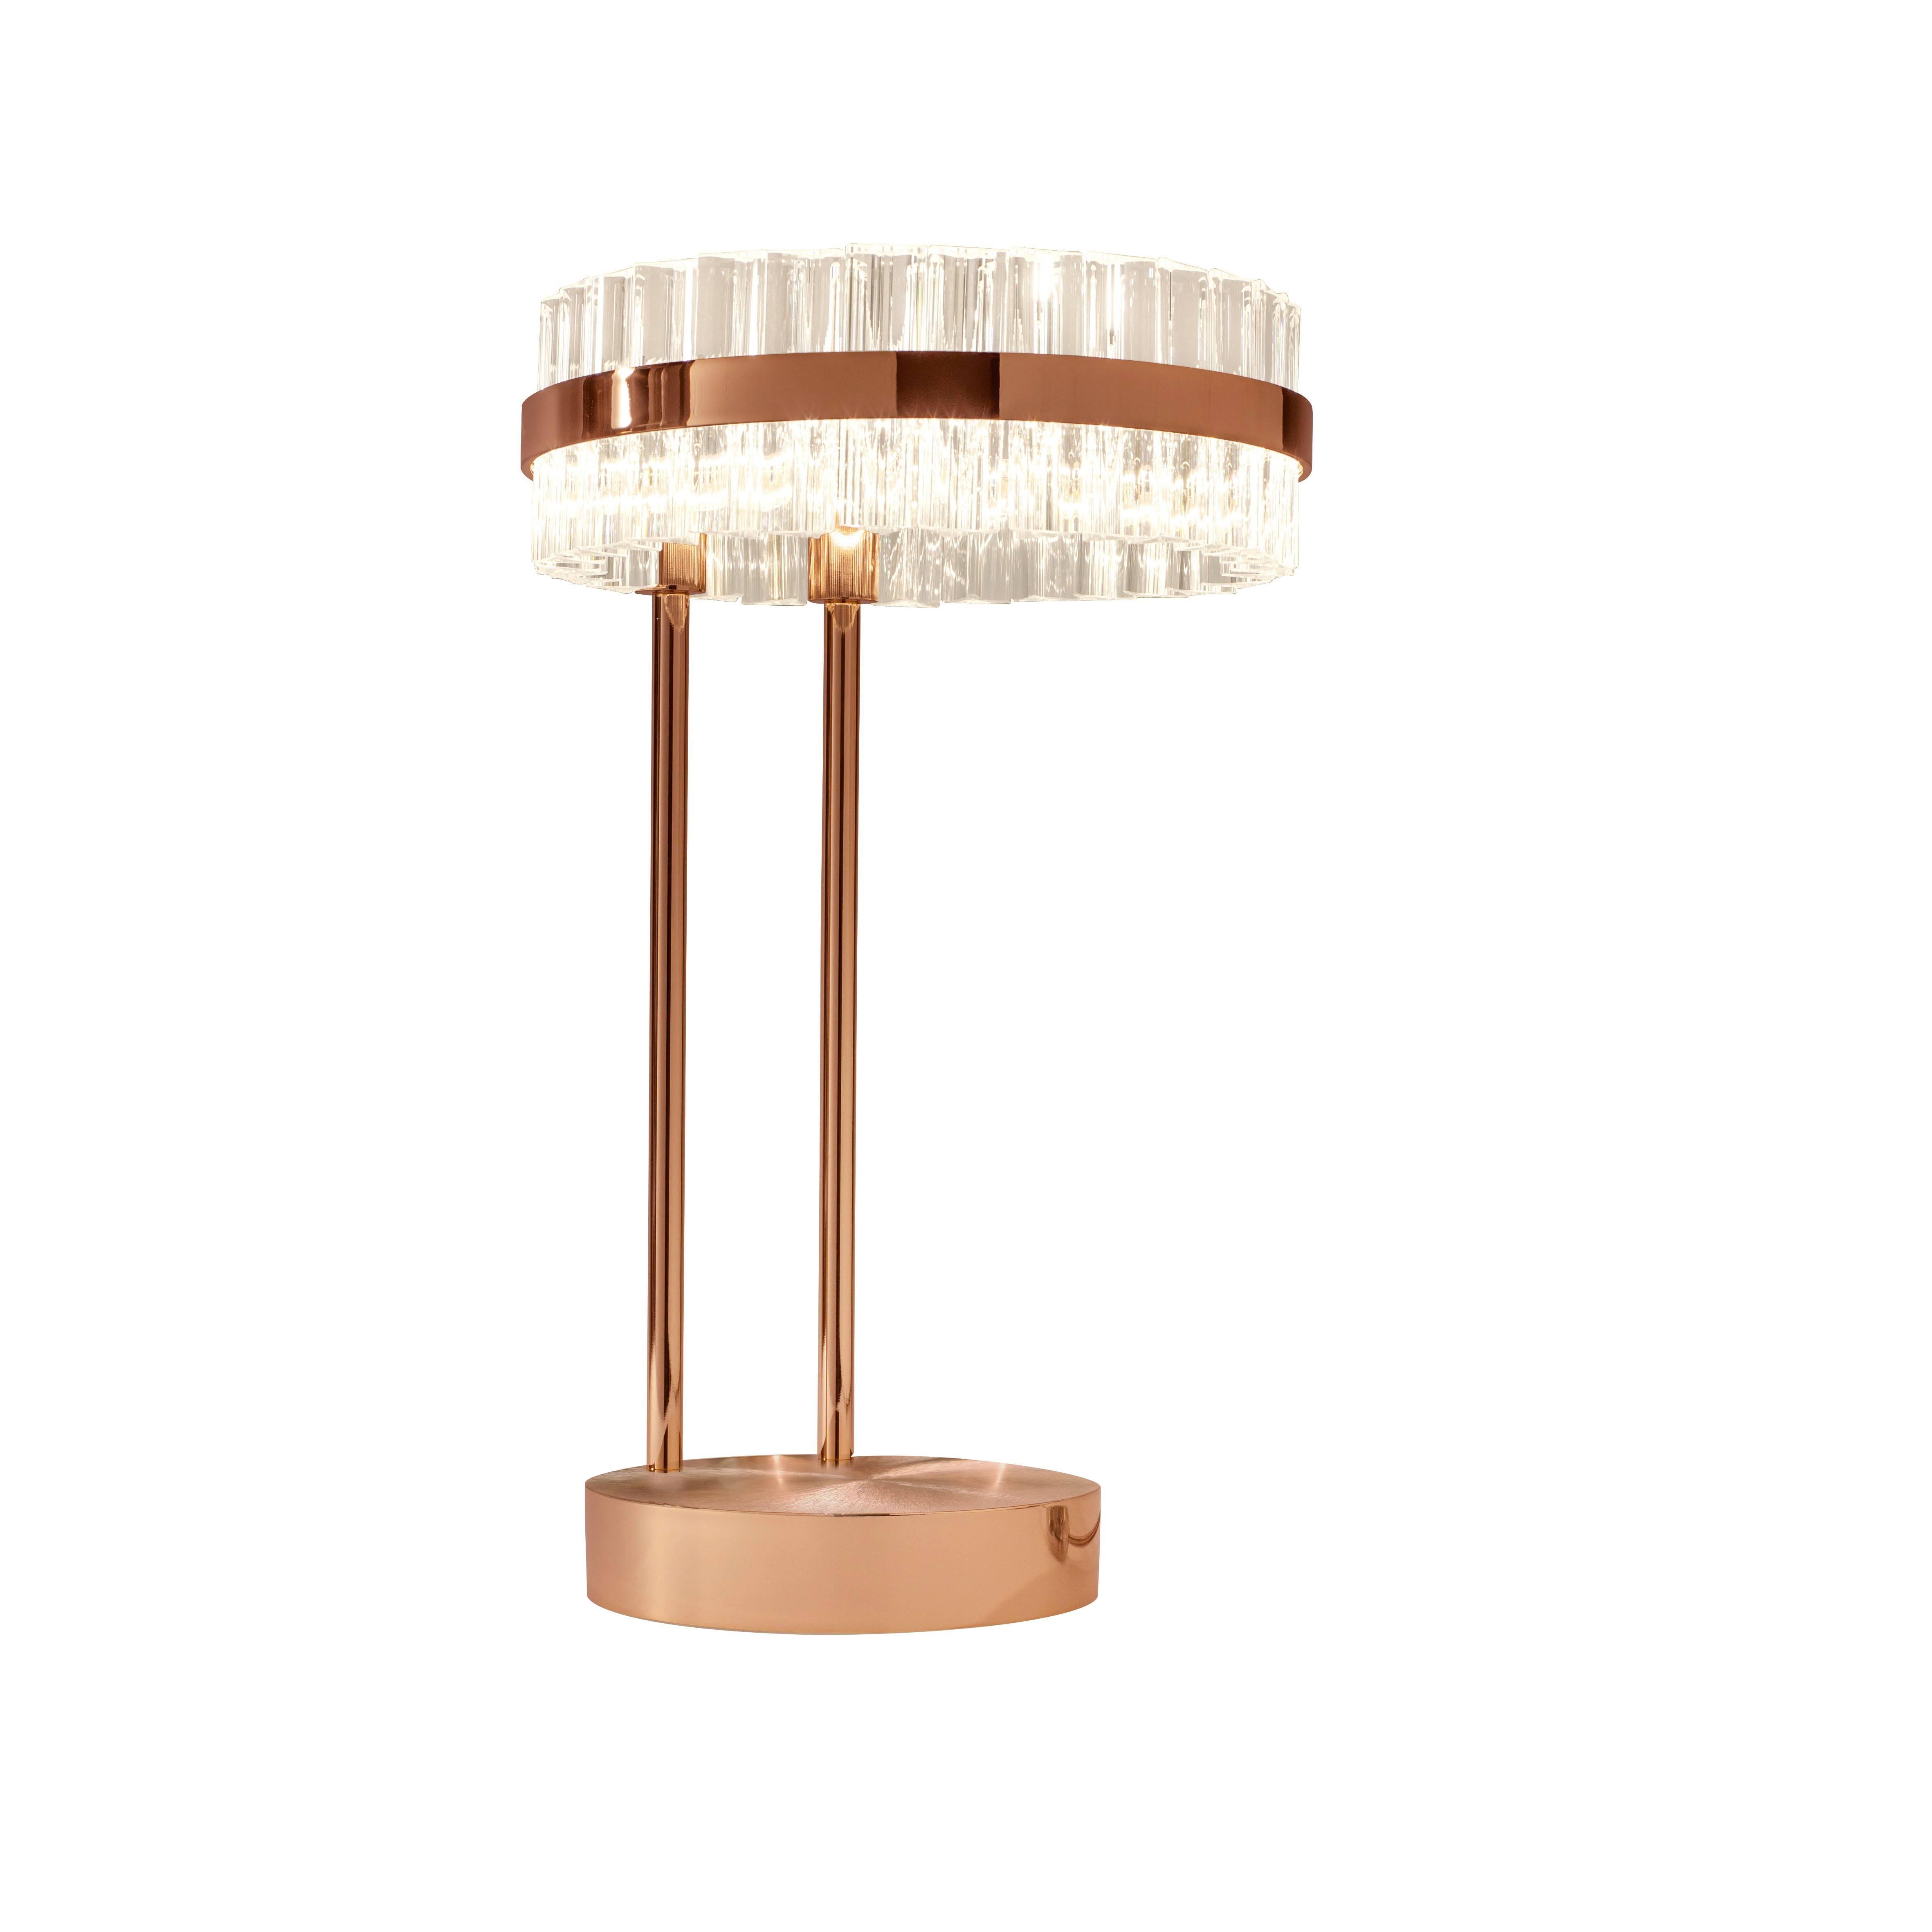 Saturno Table Lamp - Polished Copper For Sale